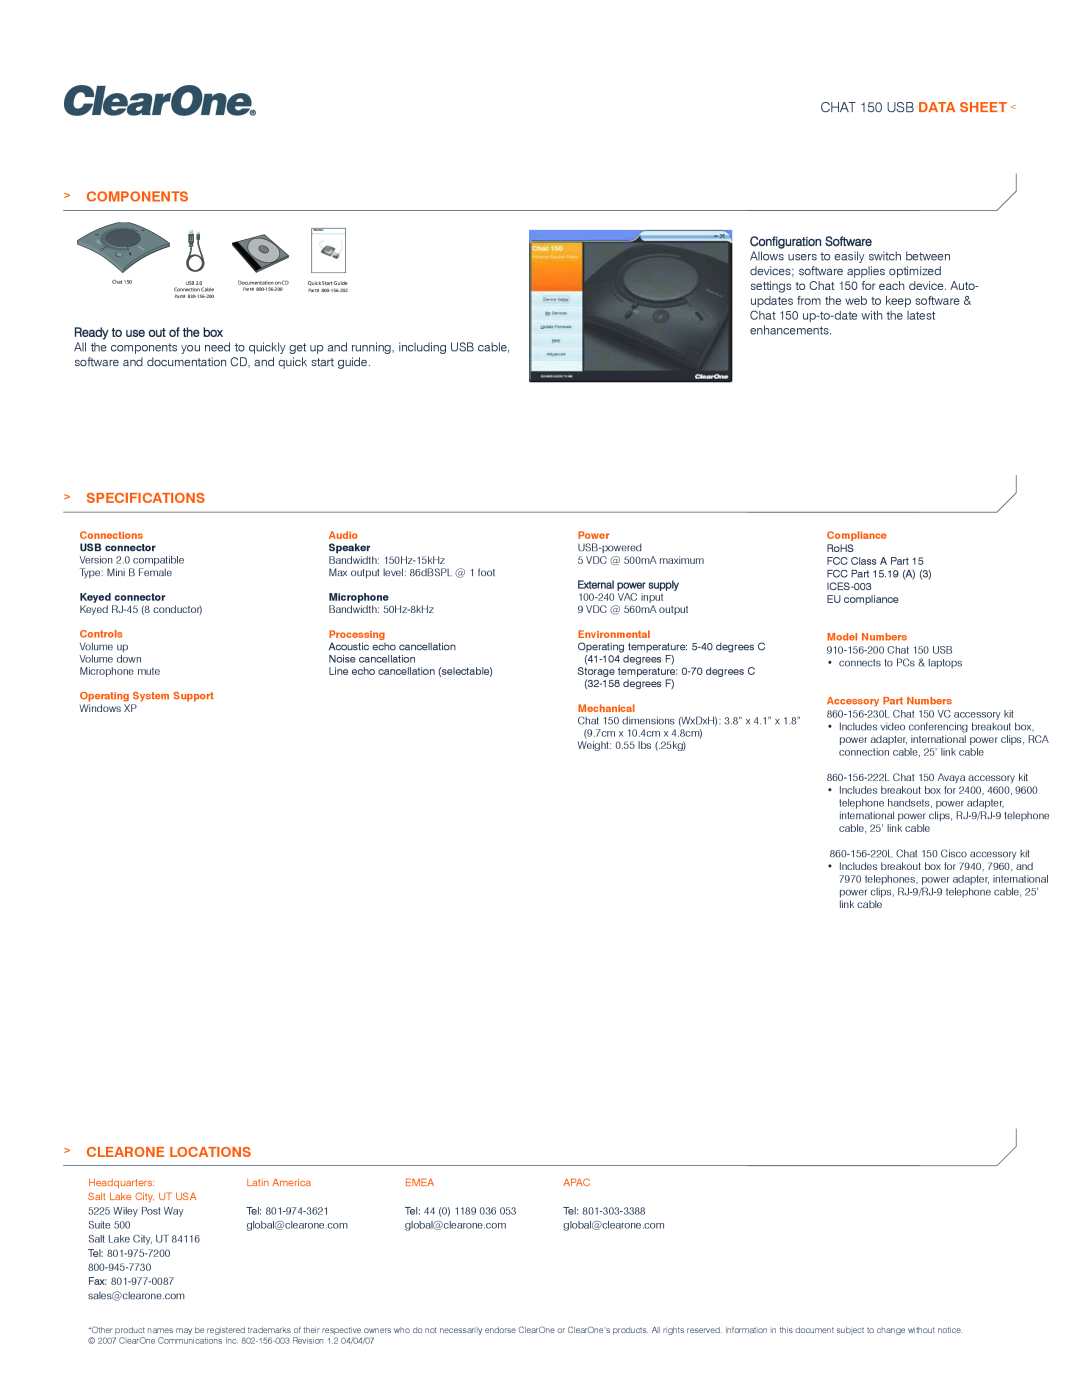 ClearOne comm Components, CHAT 150 USB DATA SHEET, Specifications, Clearone Locations, Ready to use out of the box 